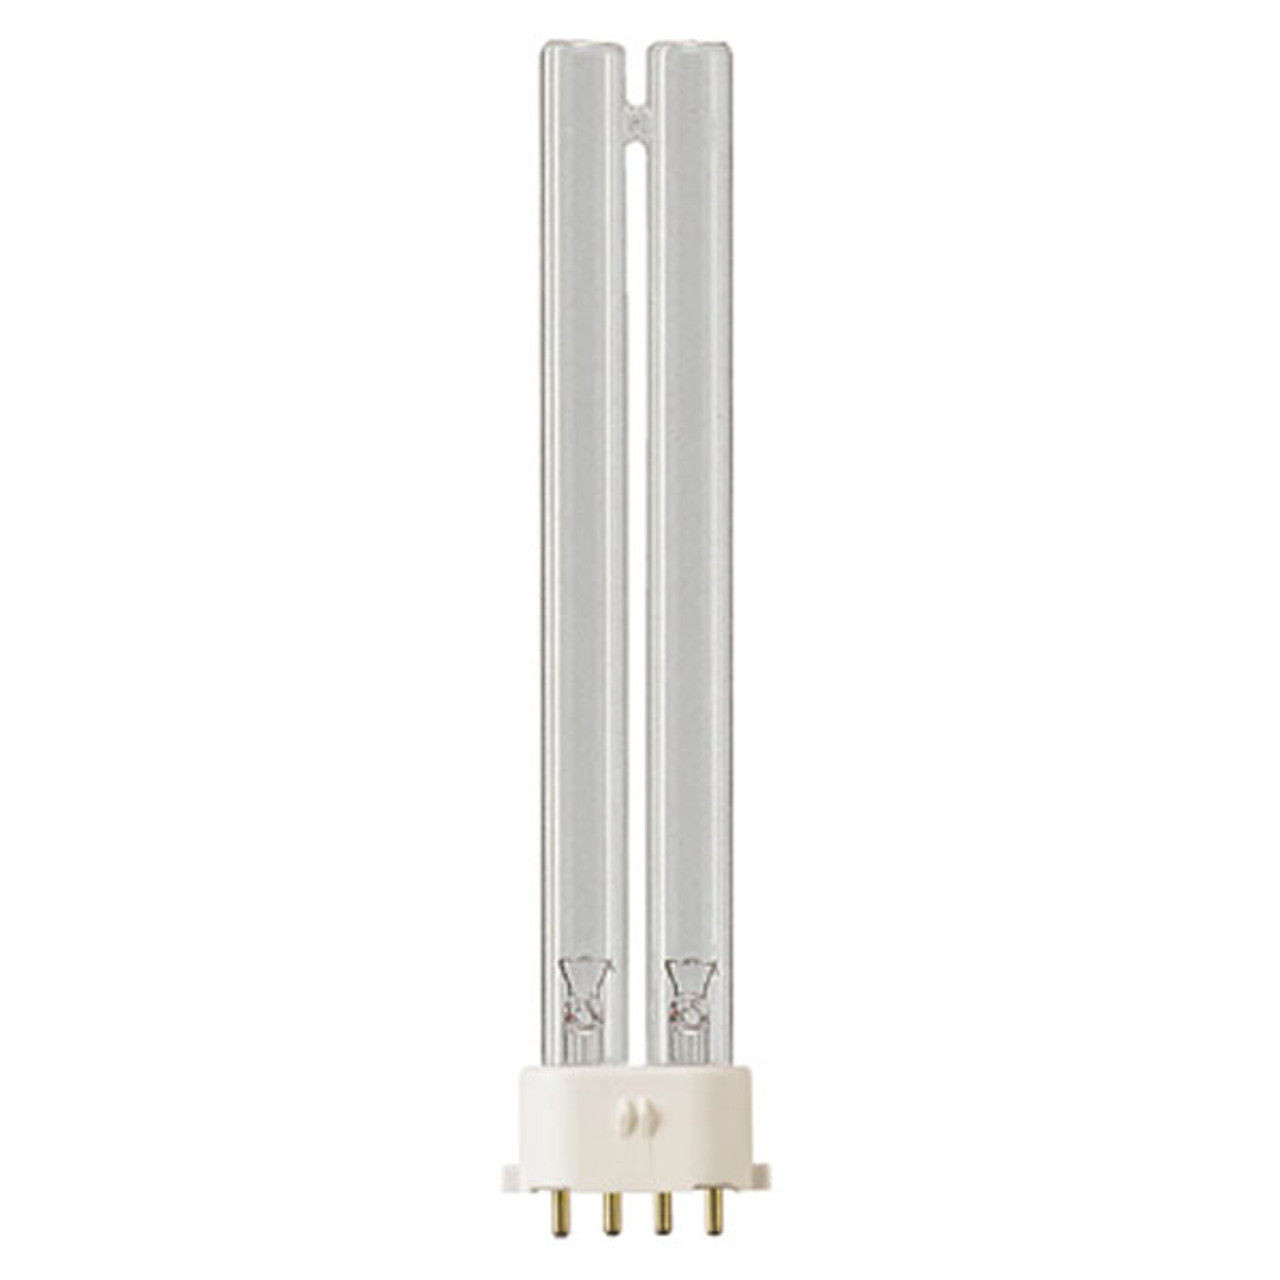 Philips PL-S 9W 4-Pin 2G7 Germicidal